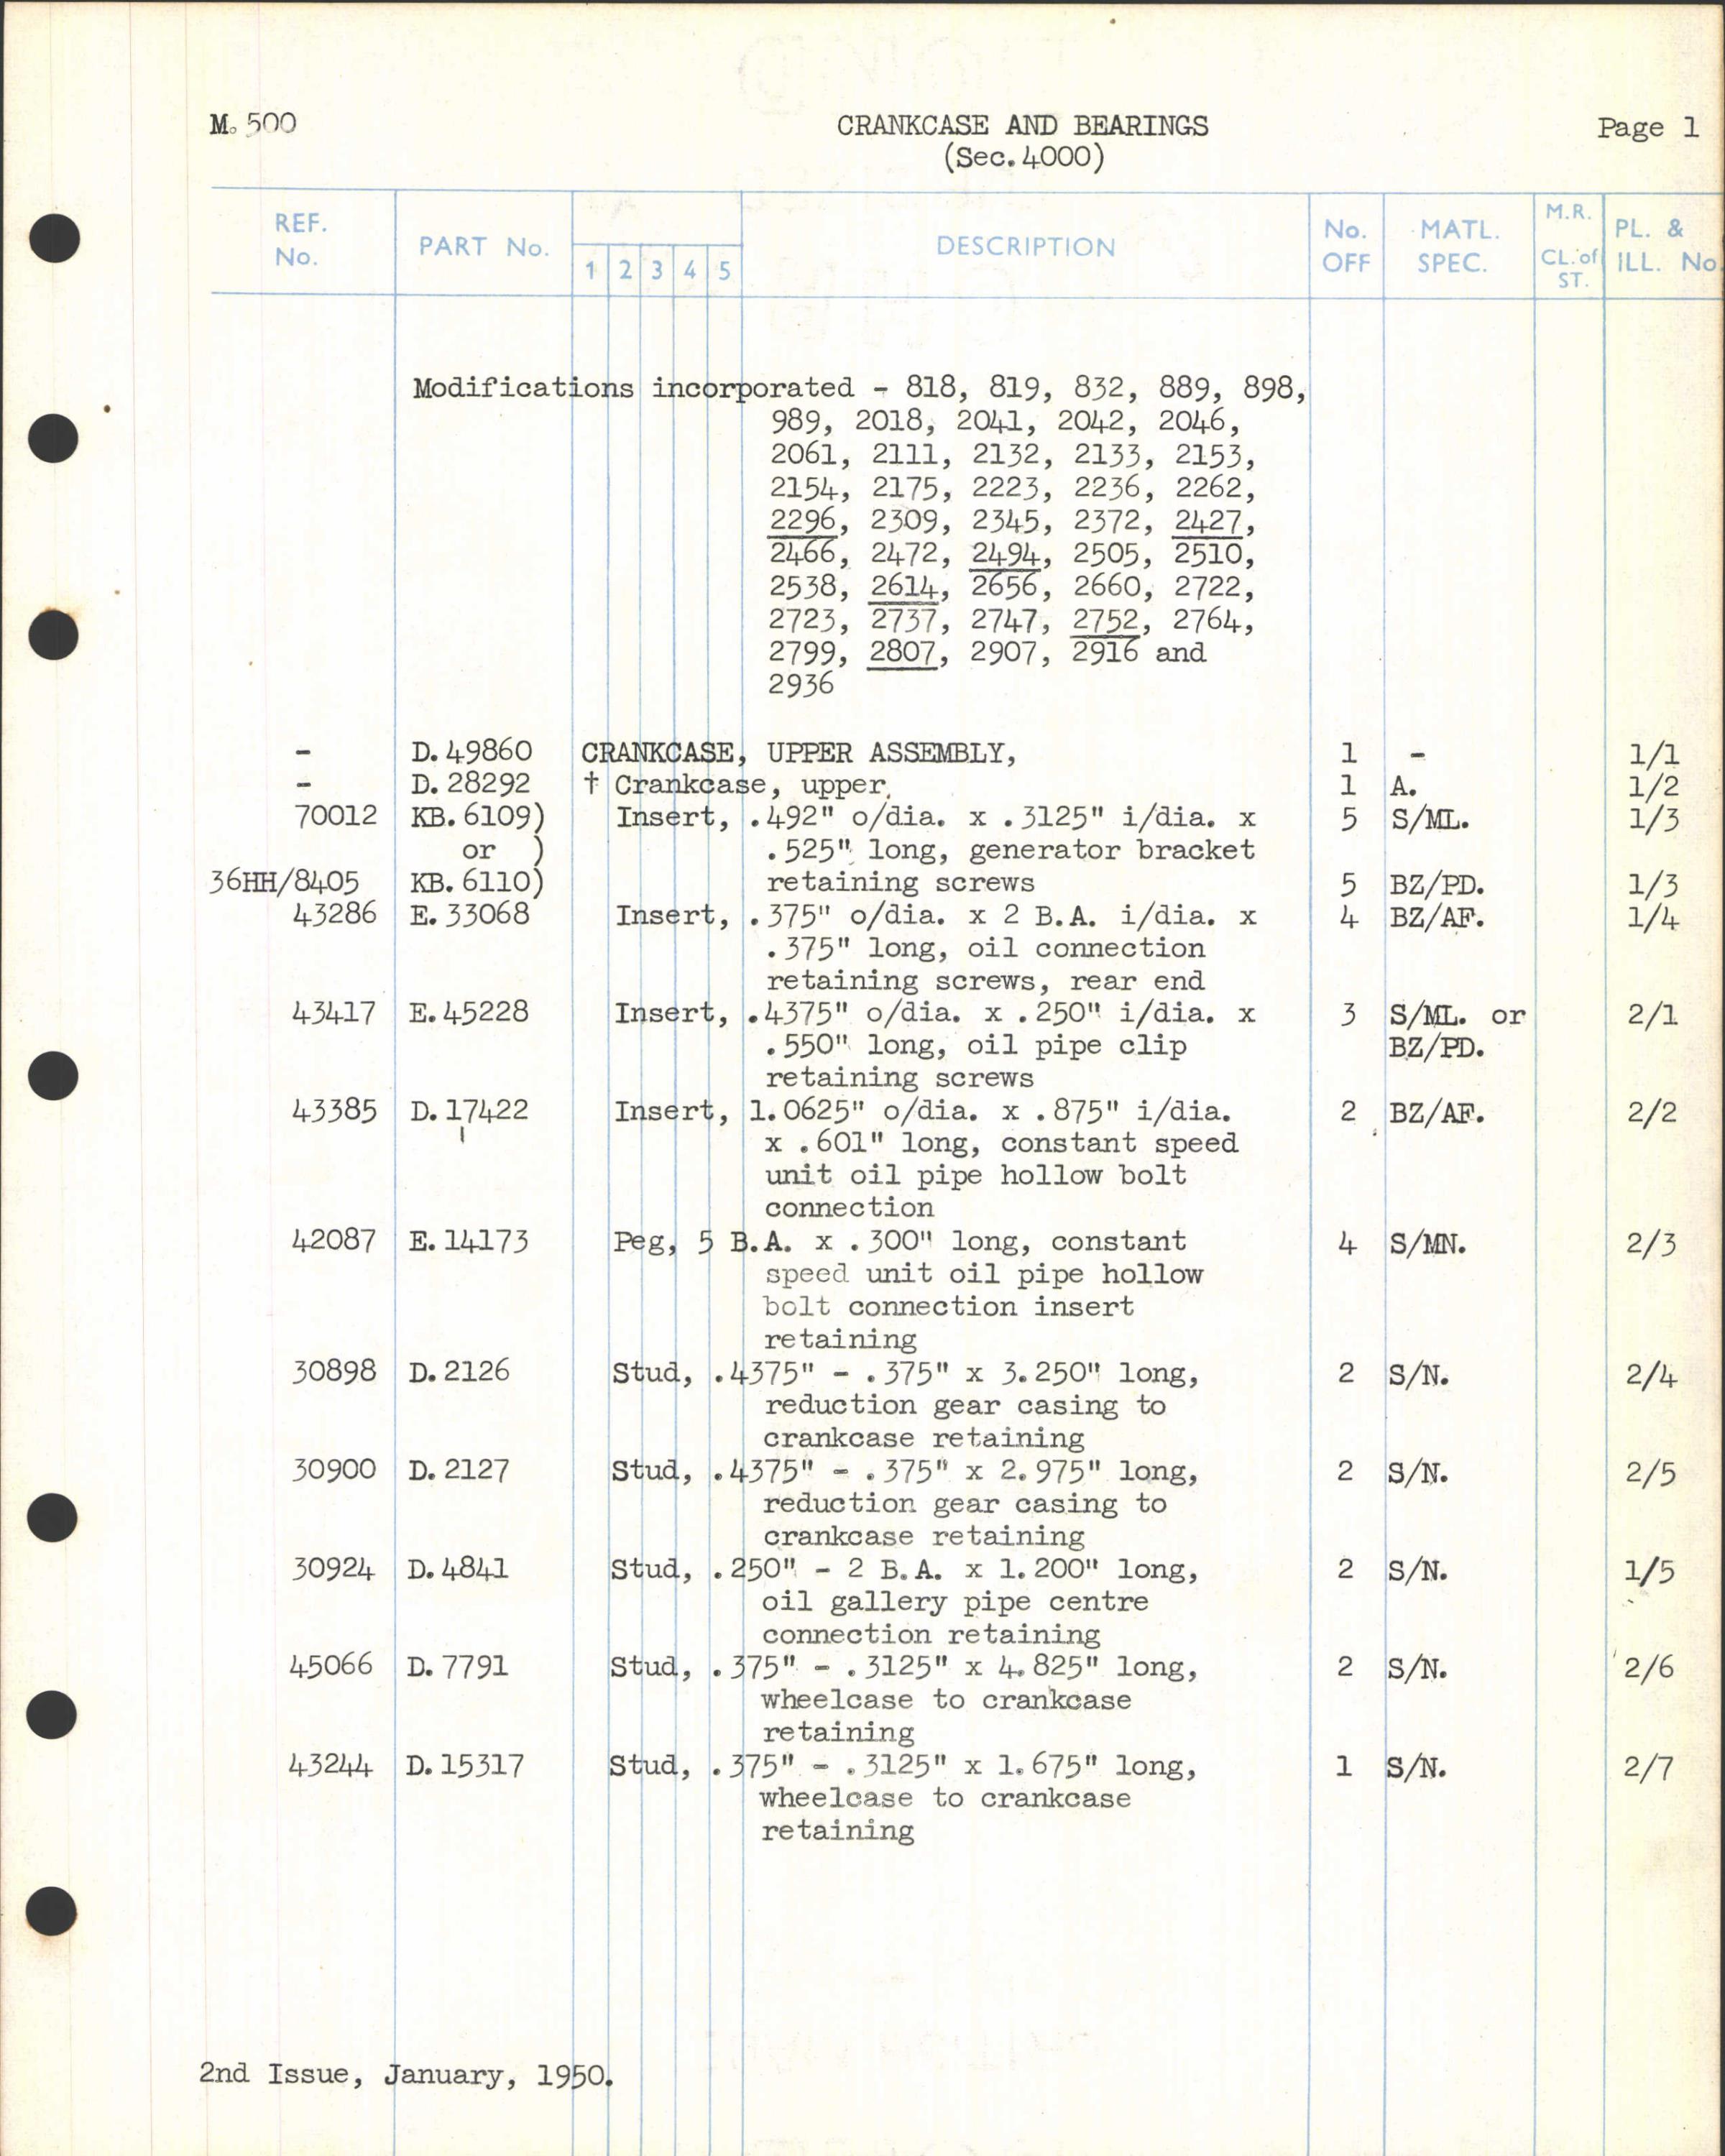 Sample page 49 from AirCorps Library document: Merlin 500 Engine Spare Parts Schedule